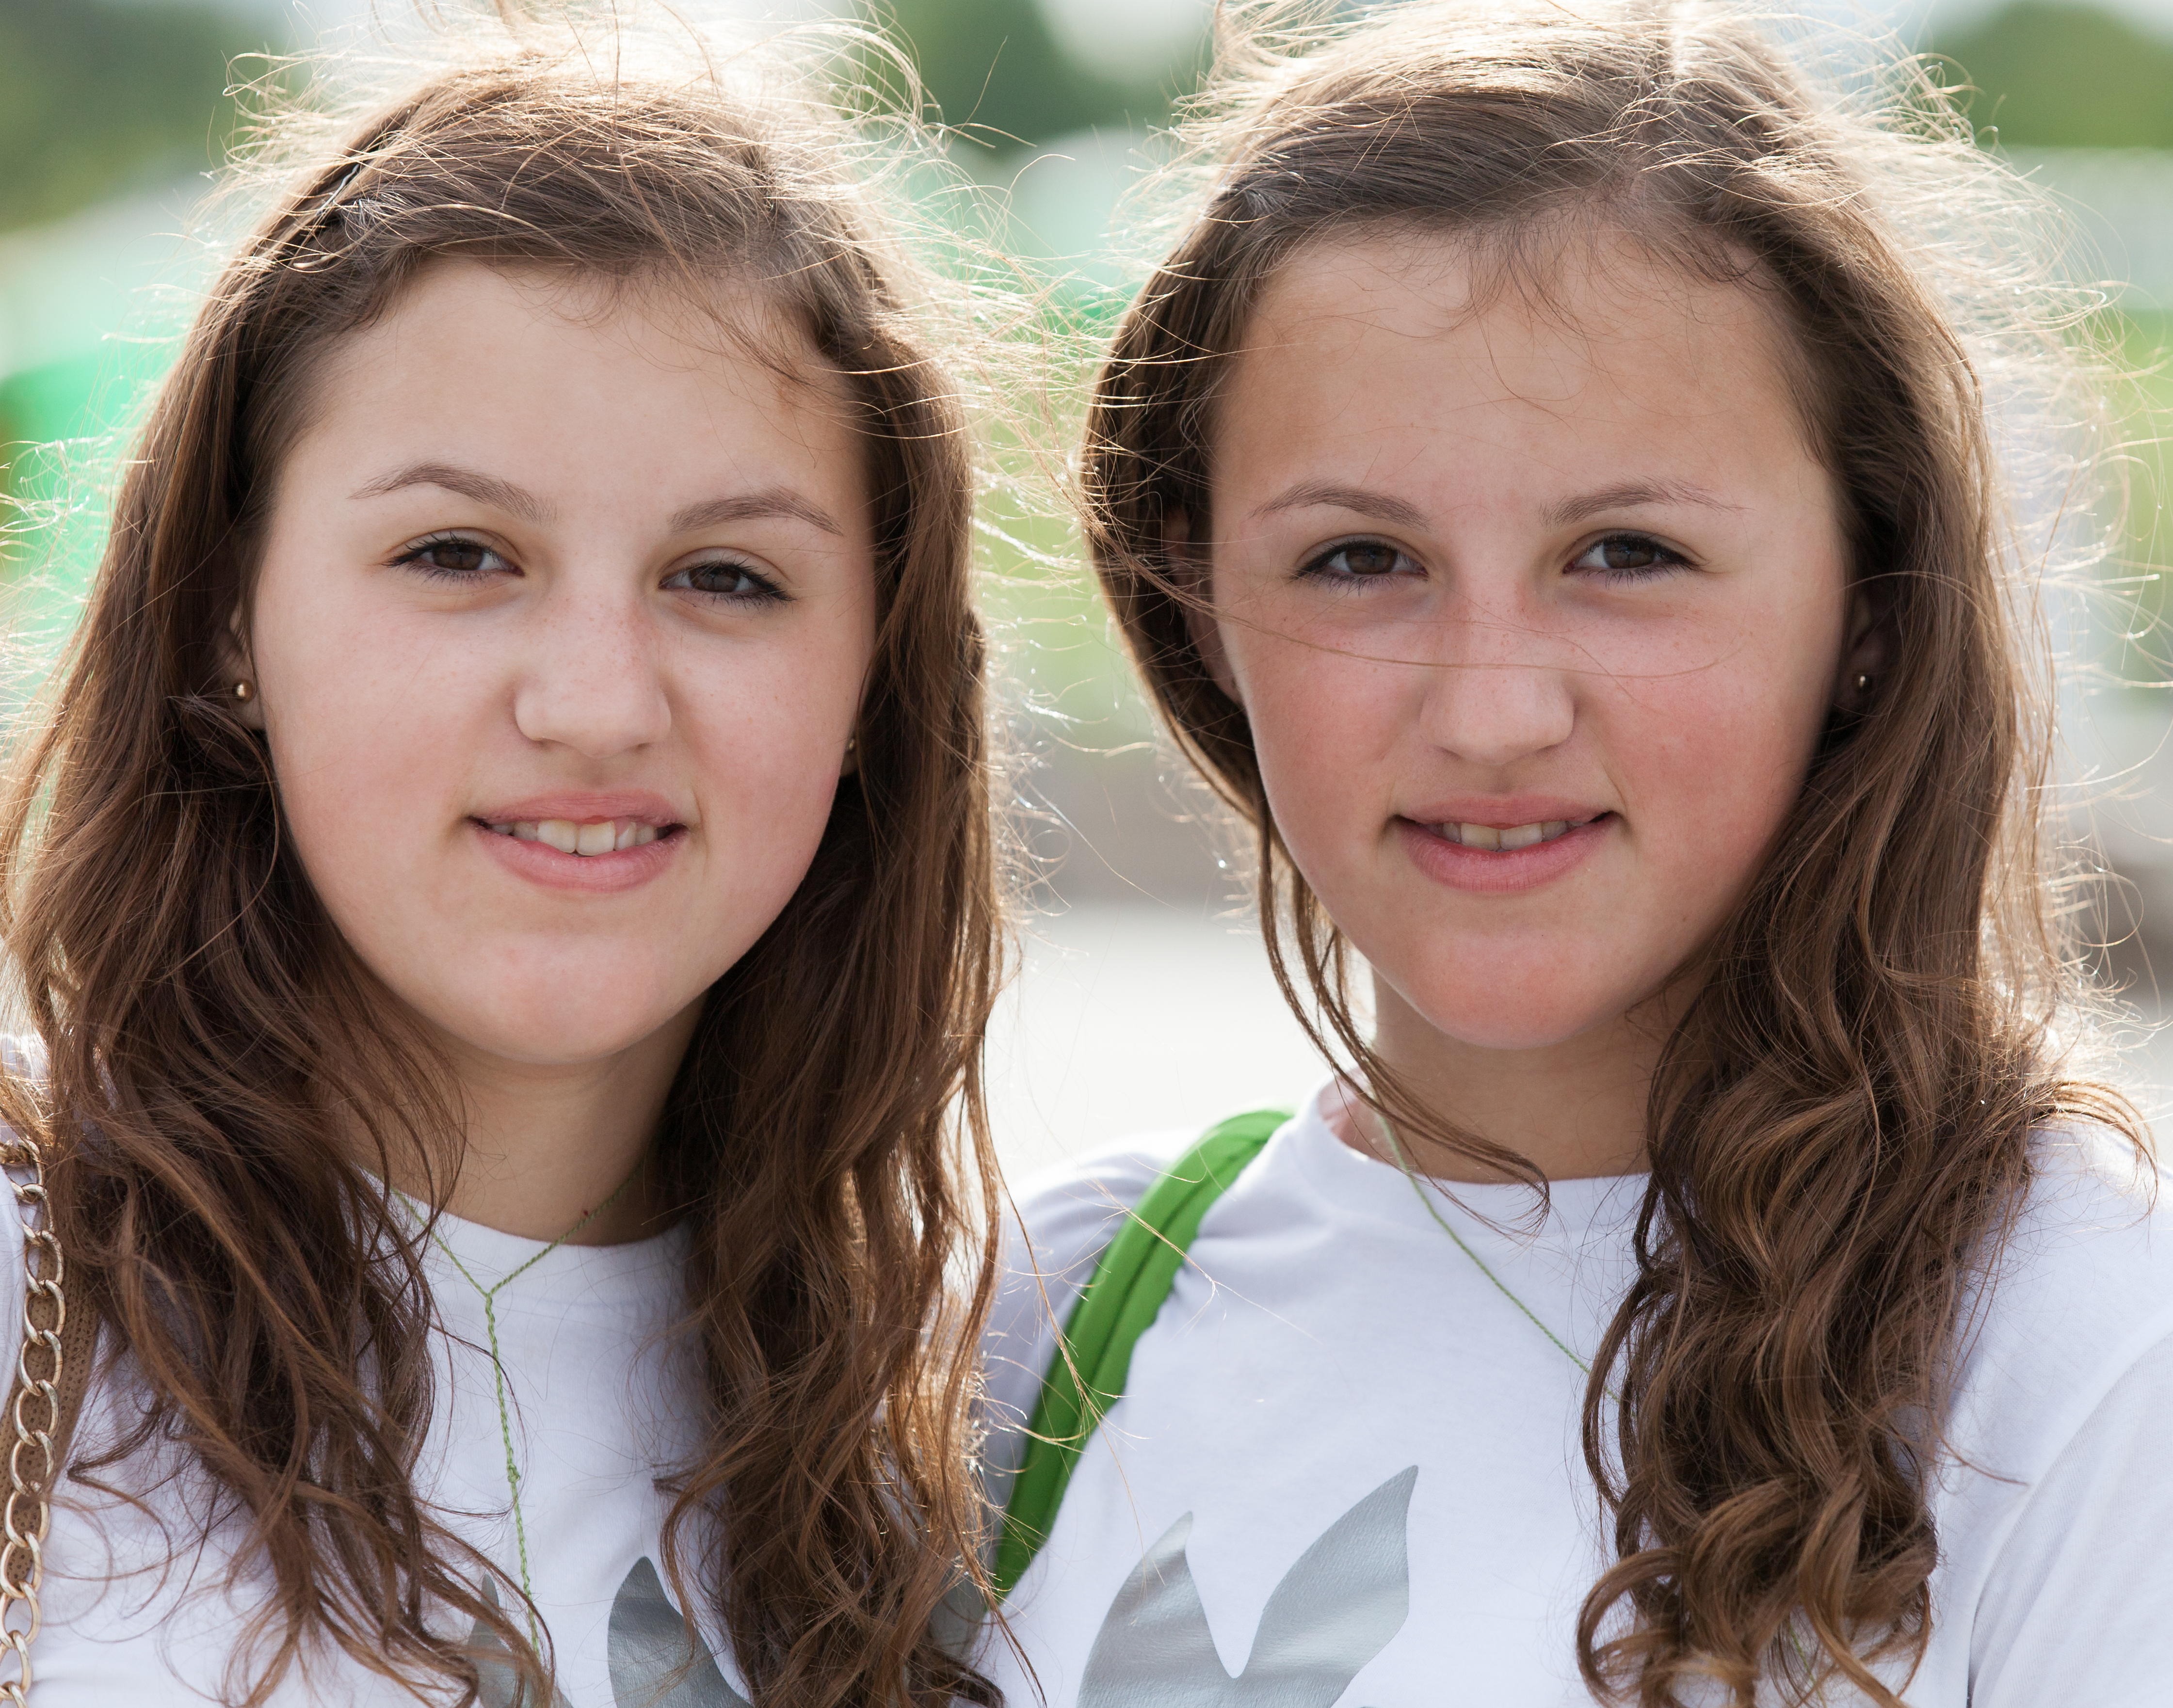 two girls photographed in July 2014